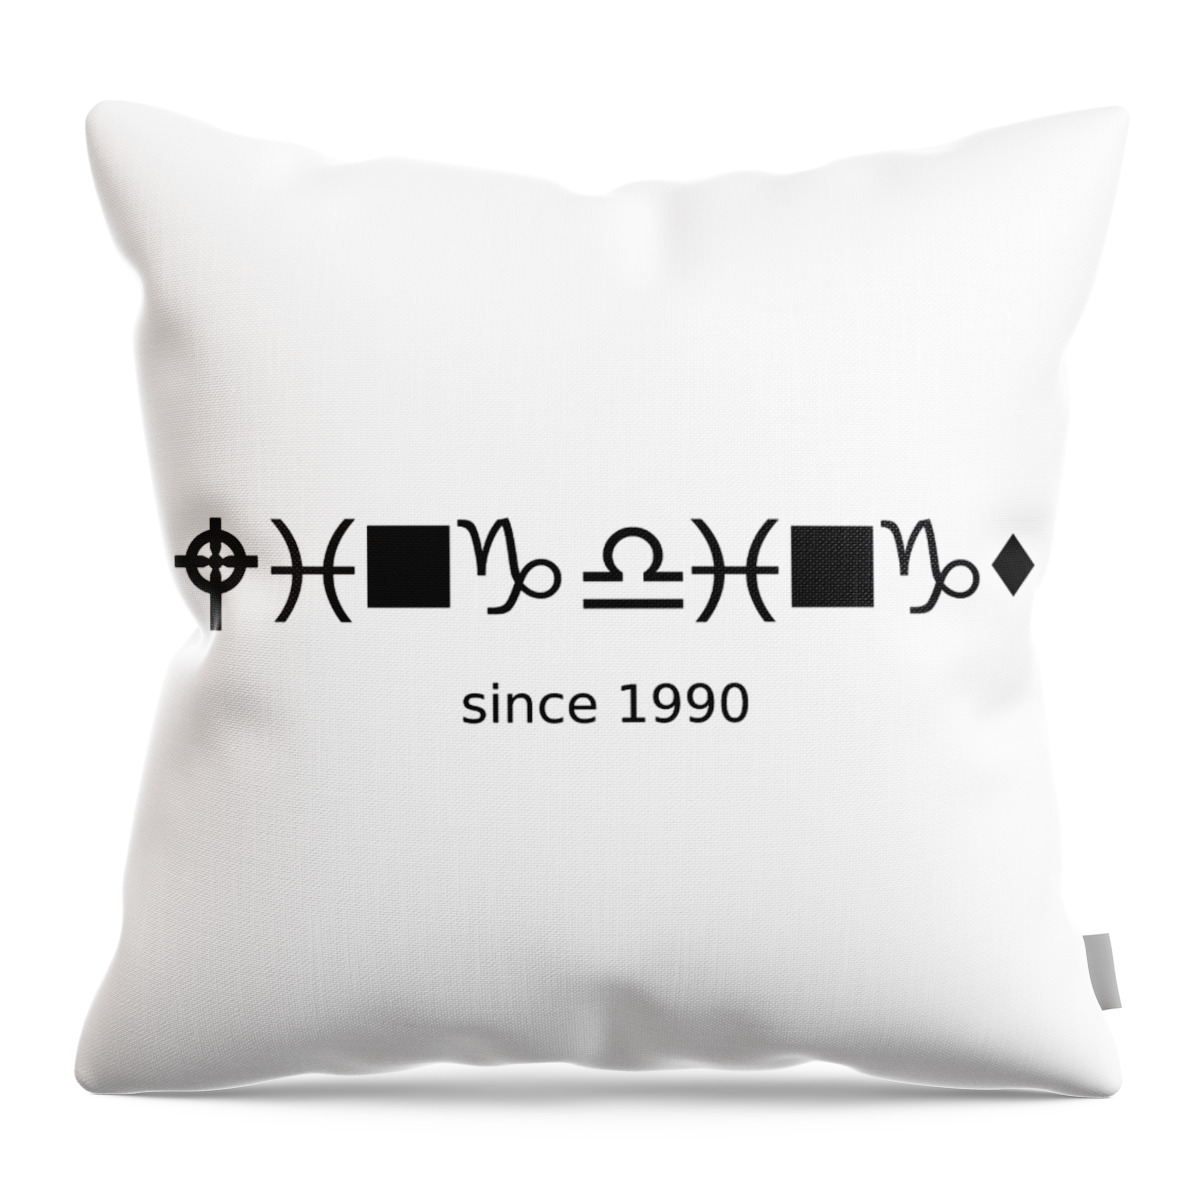 Richard Reeve Throw Pillow featuring the digital art Wingdings since 1990 - Black by Richard Reeve